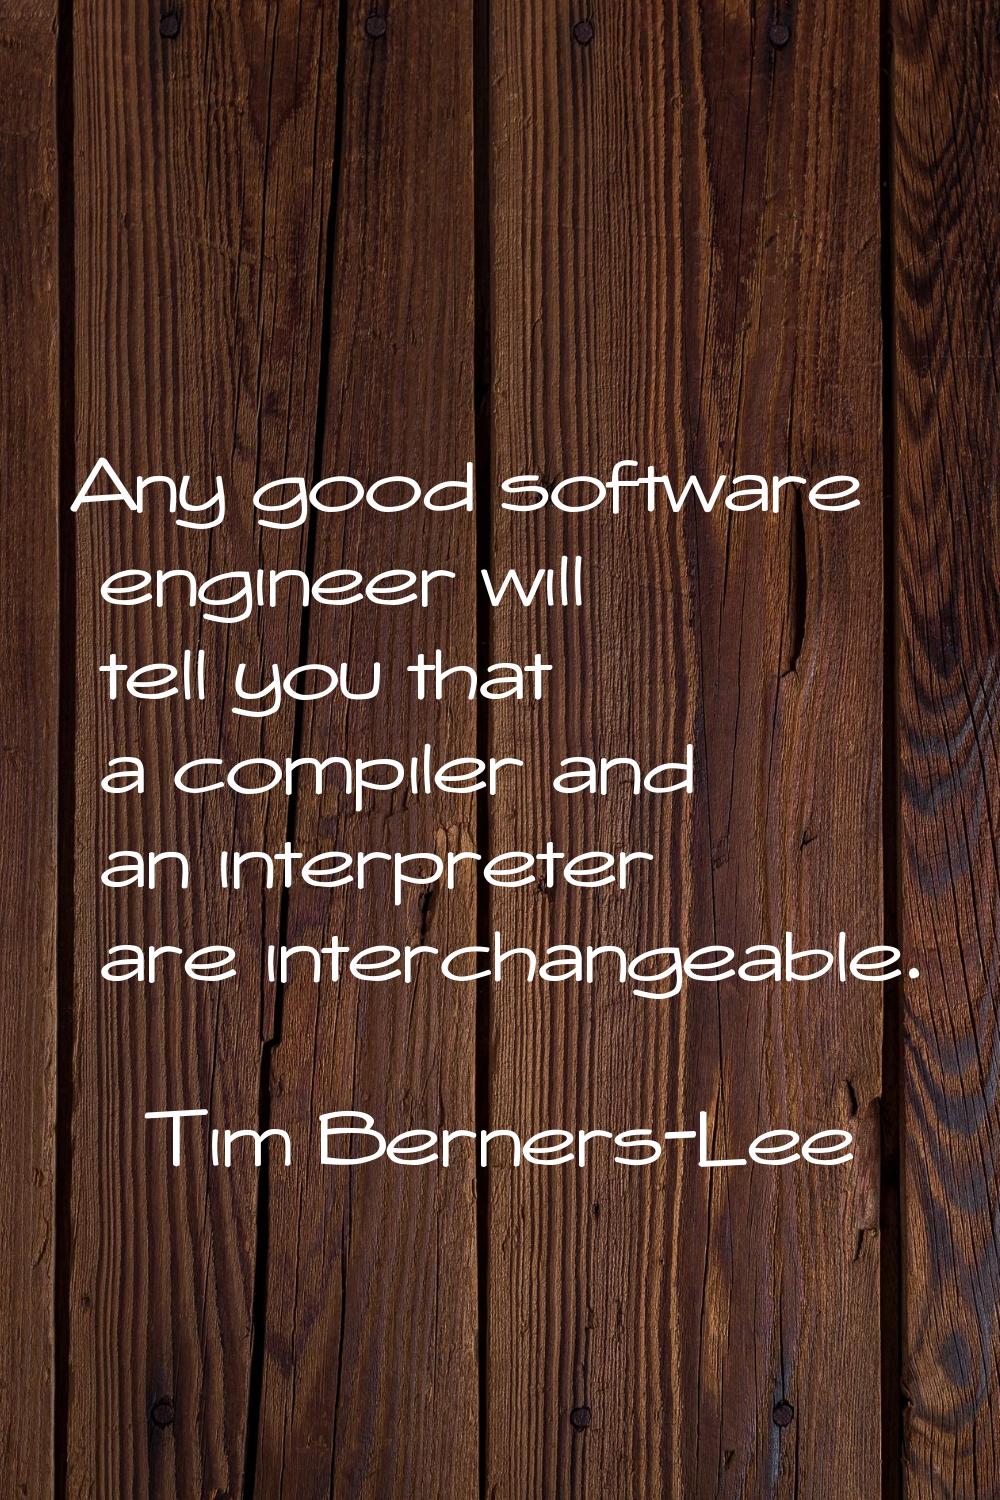 Any good software engineer will tell you that a compiler and an interpreter are interchangeable.